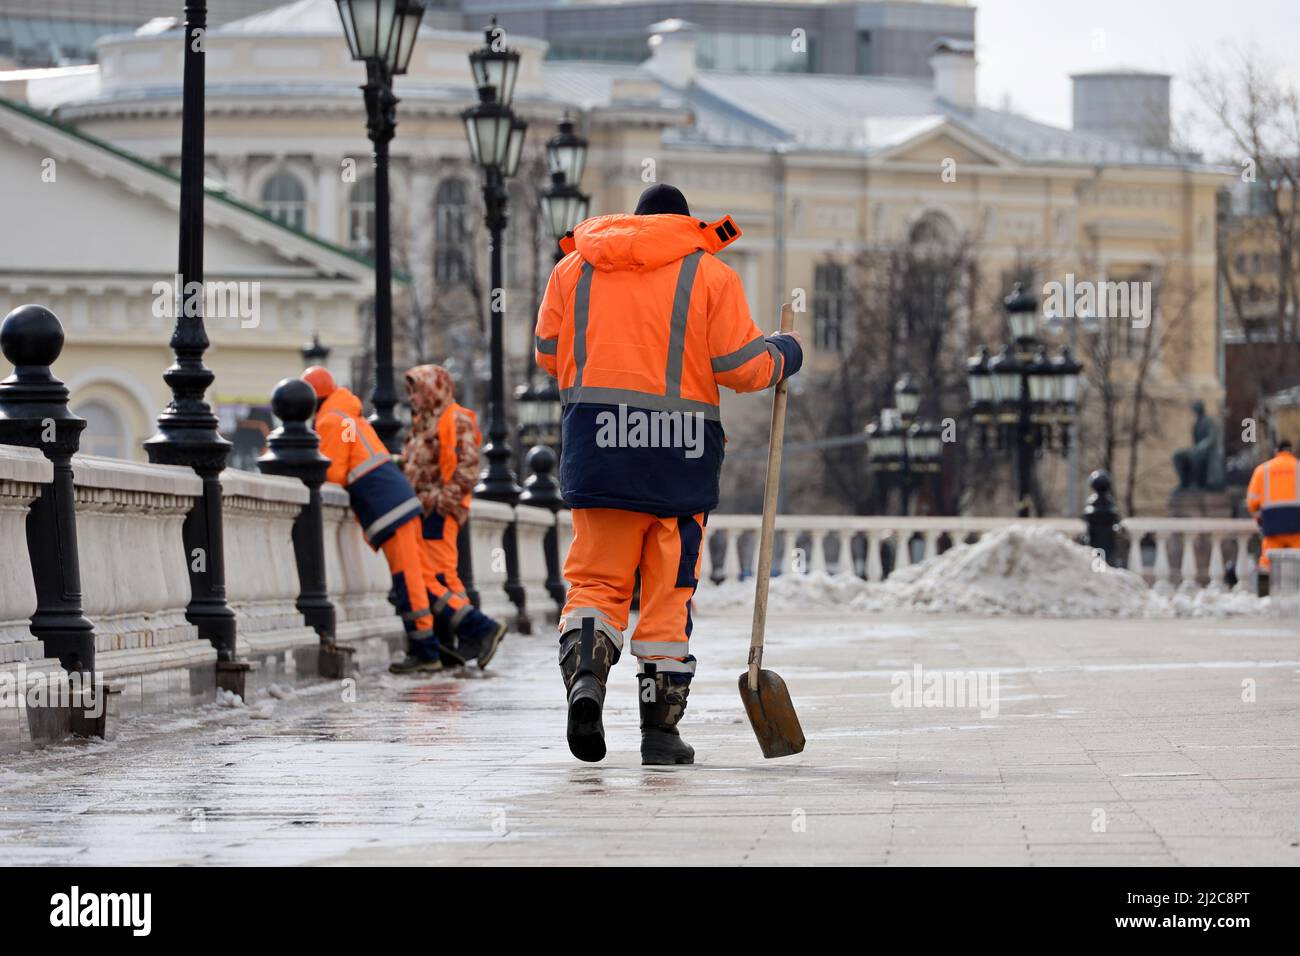 Workers during street cleaning. Janitors with shovels, snow removal in spring city Stock Photo